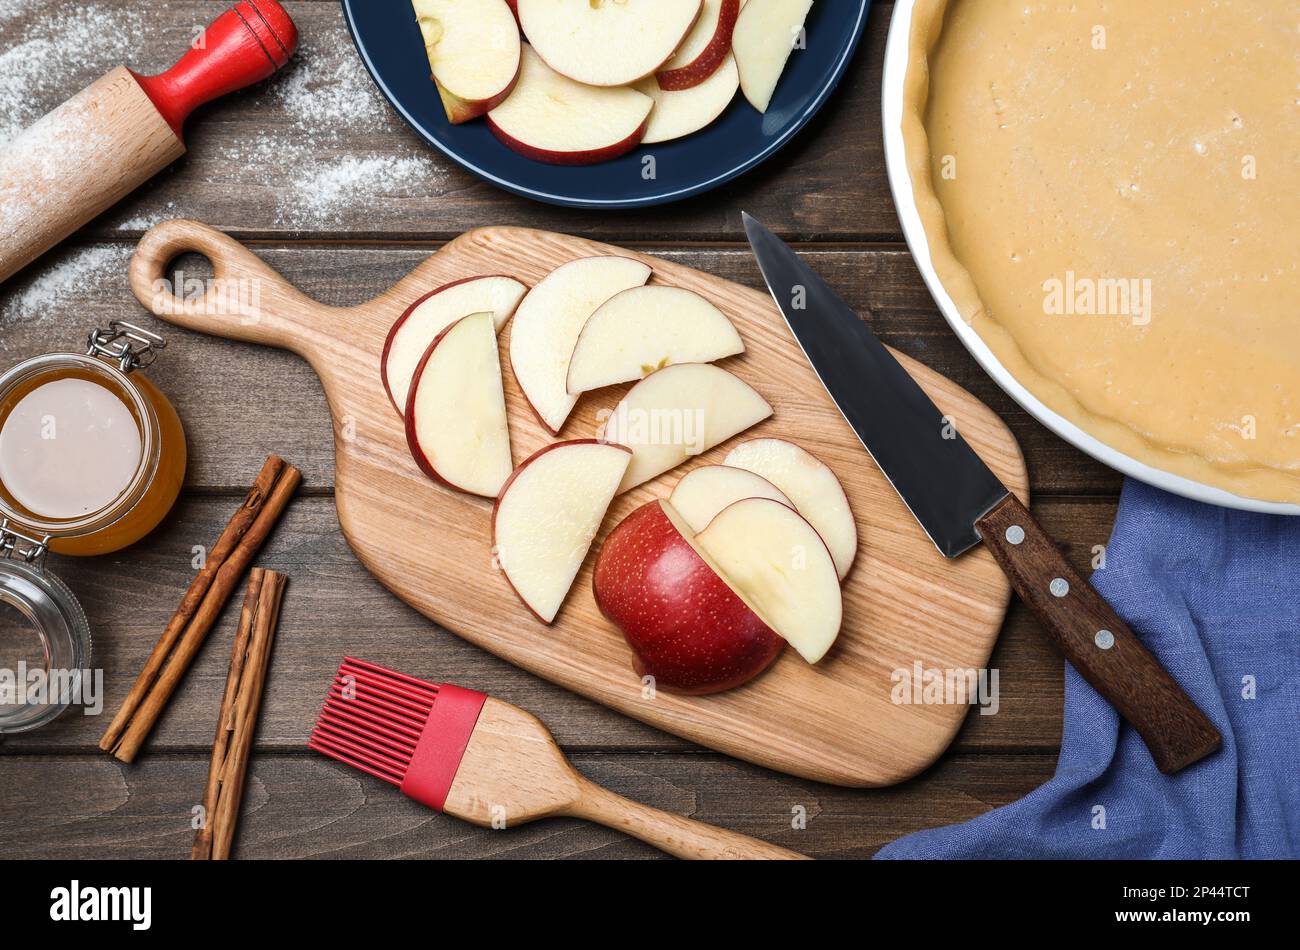 Cut fresh apple with knife and board on wooden table, flat lay. Baking pie Stock Photo